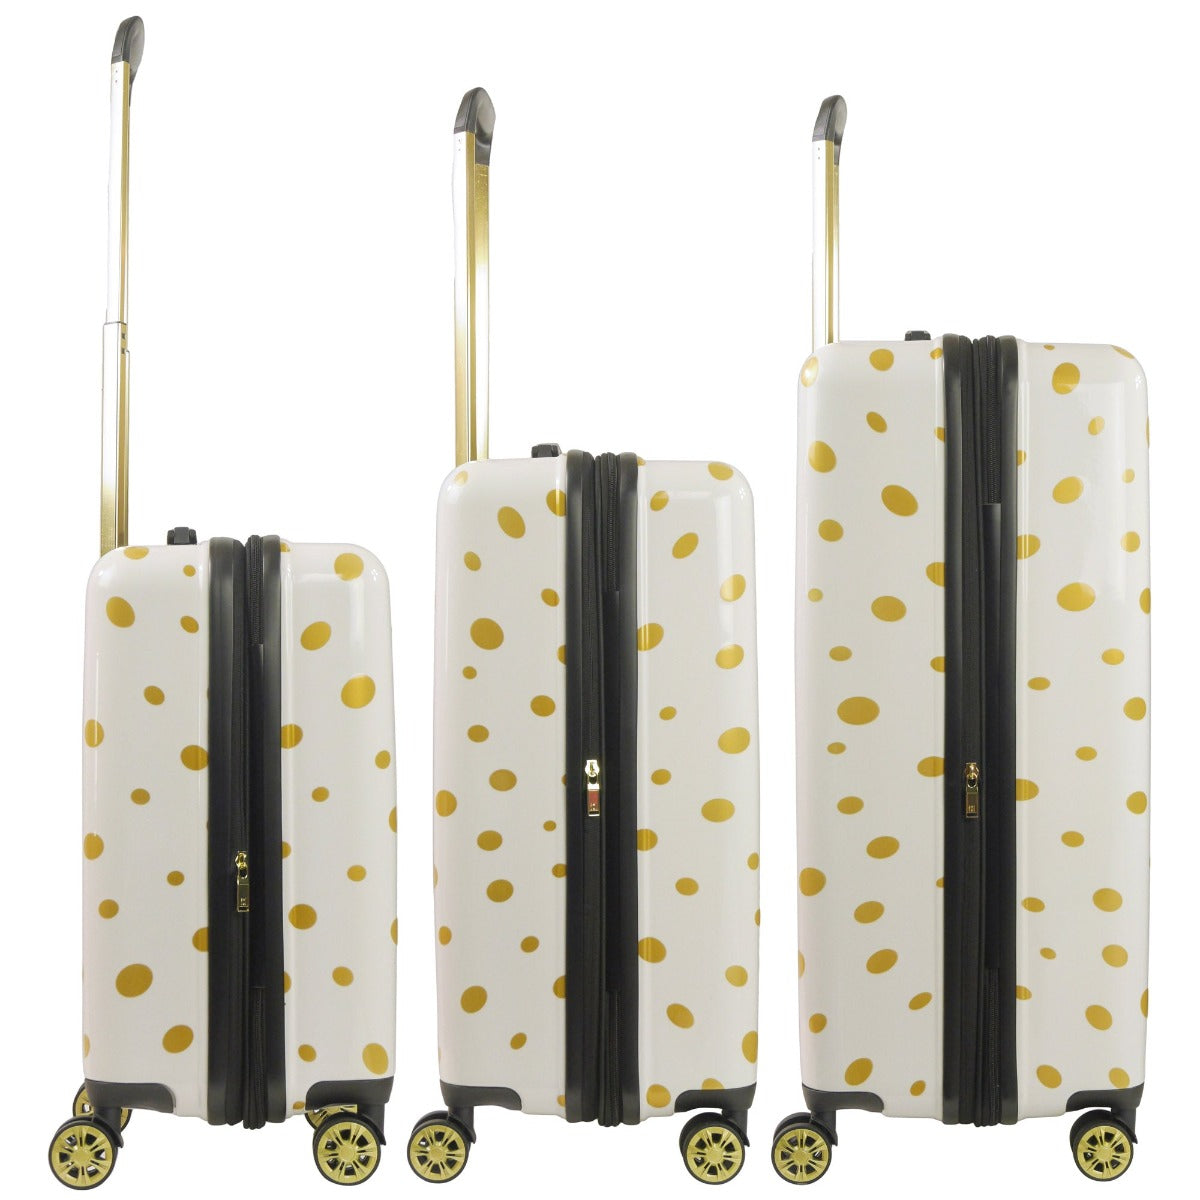 Ful Impulse Mixed Dots Hardsided Spinners suitcase 3 piece luggage set white gold detail polka dots 22" 26" 31"